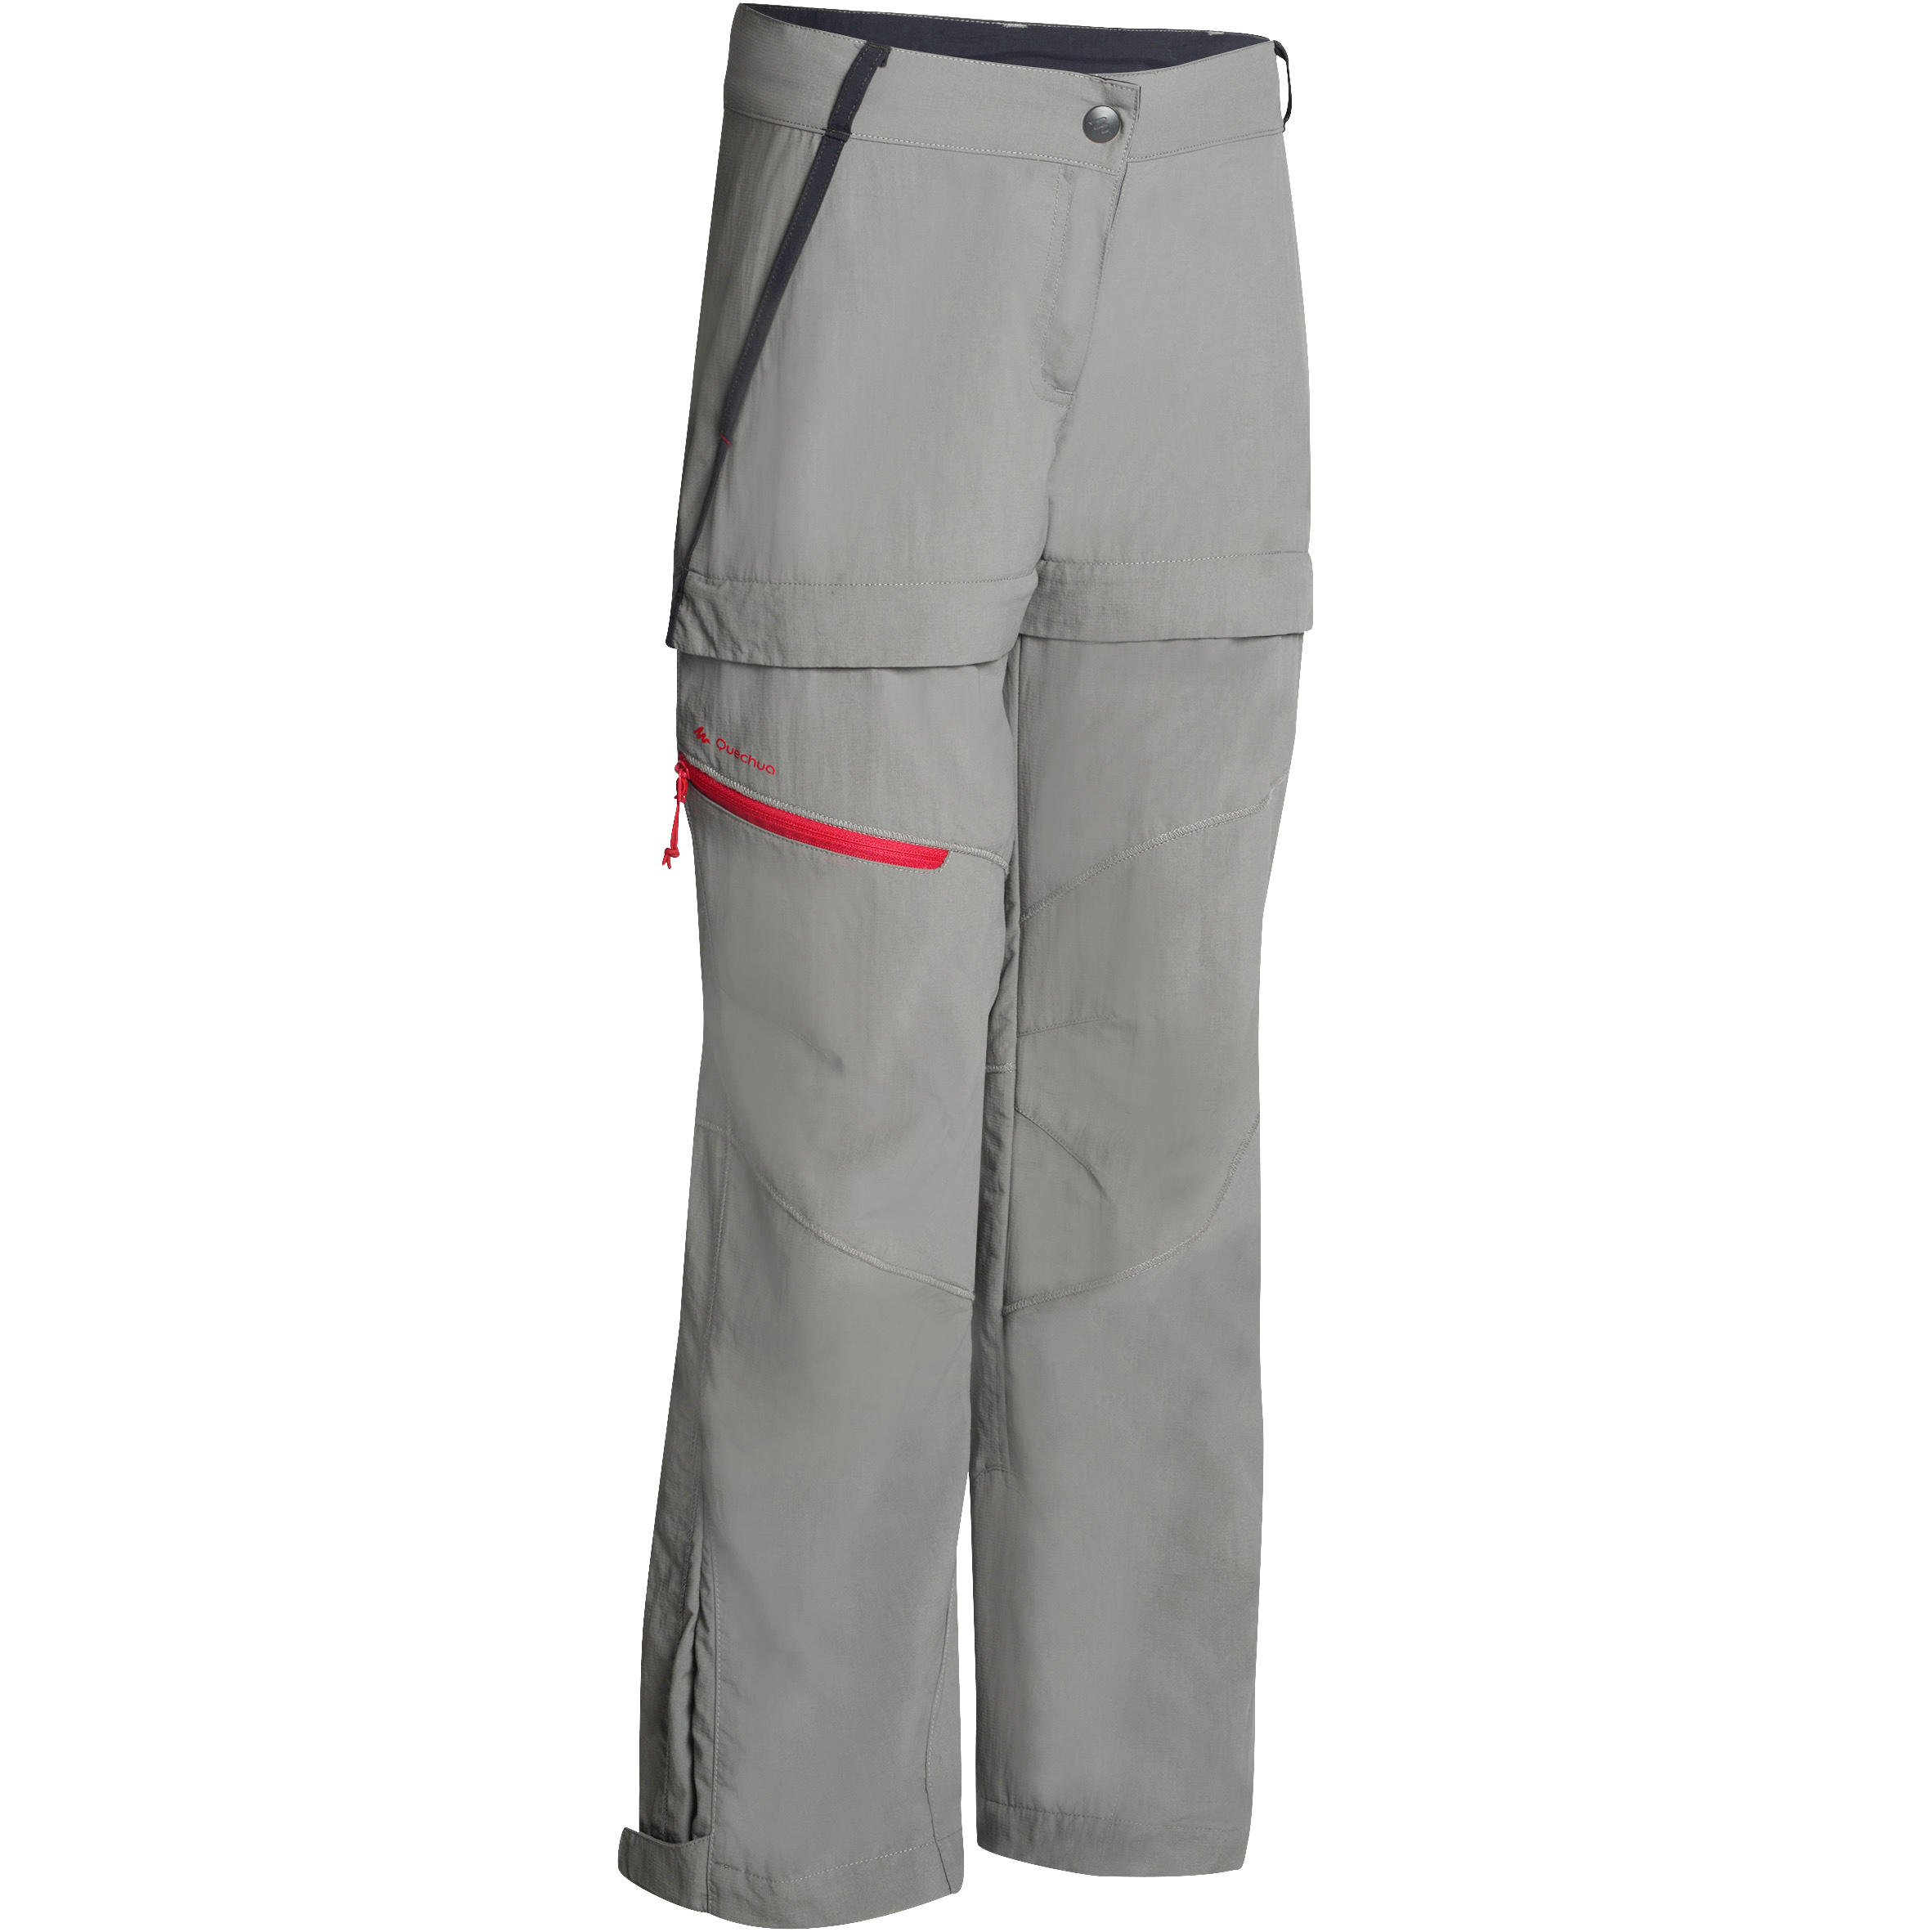 QUECHUA by Decathlon Relaxed Men Grey Trousers  Buy QUECHUA by Decathlon  Relaxed Men Grey Trousers Online at Best Prices in India  Flipkartcom